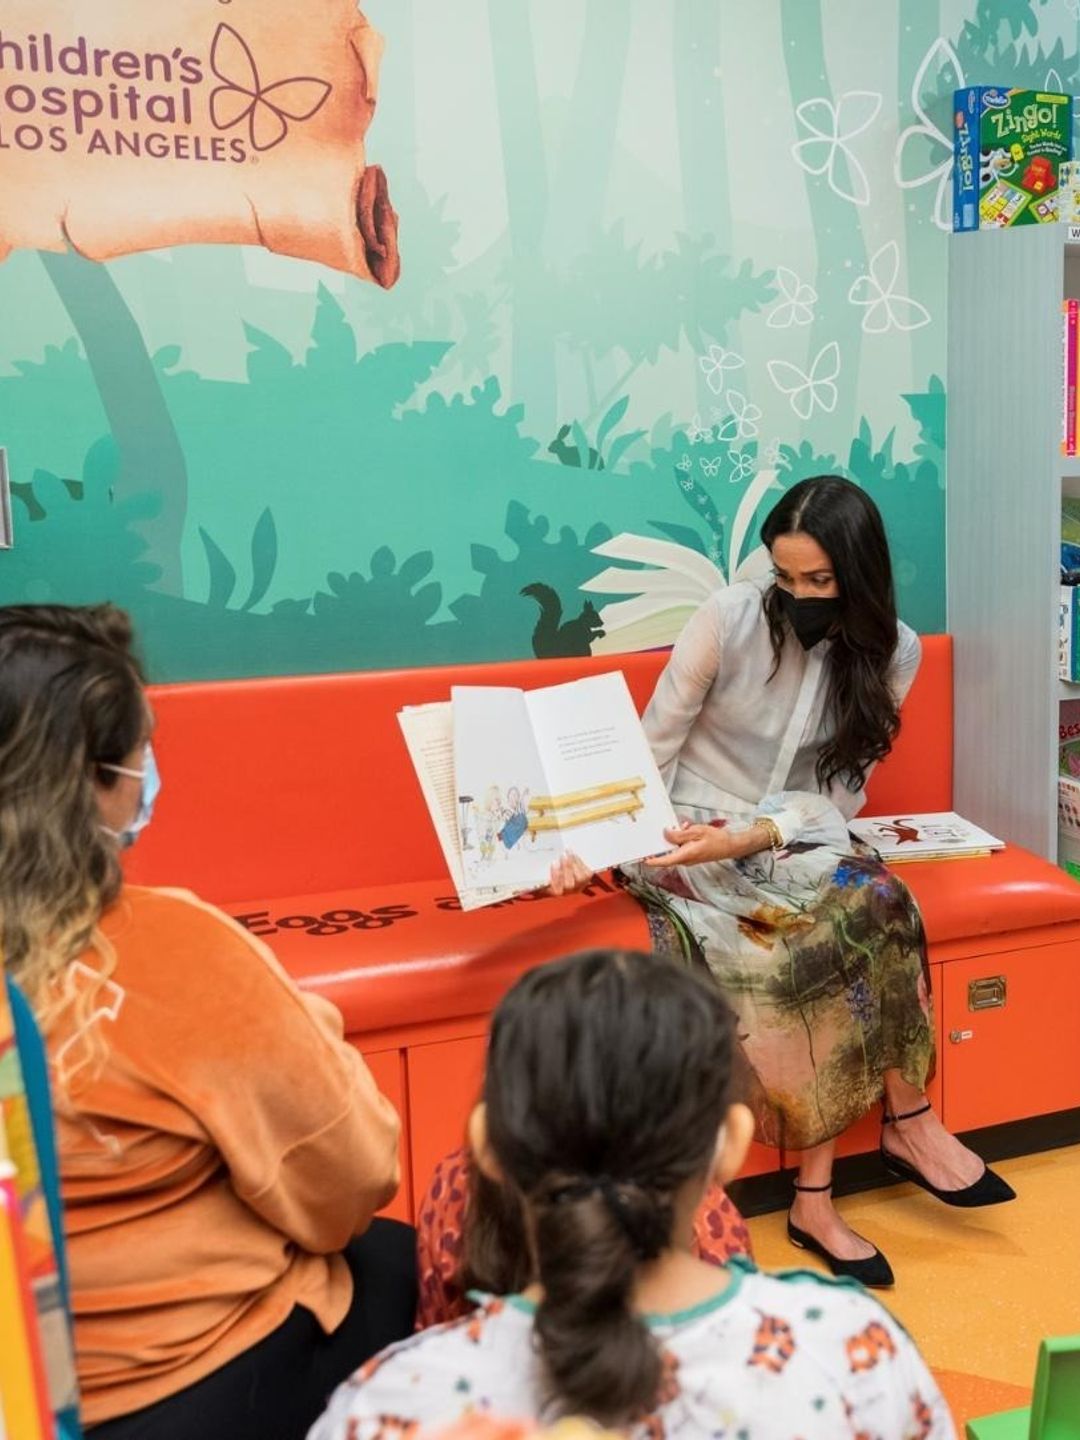 Meghan Markle reading to patients at children's hospital